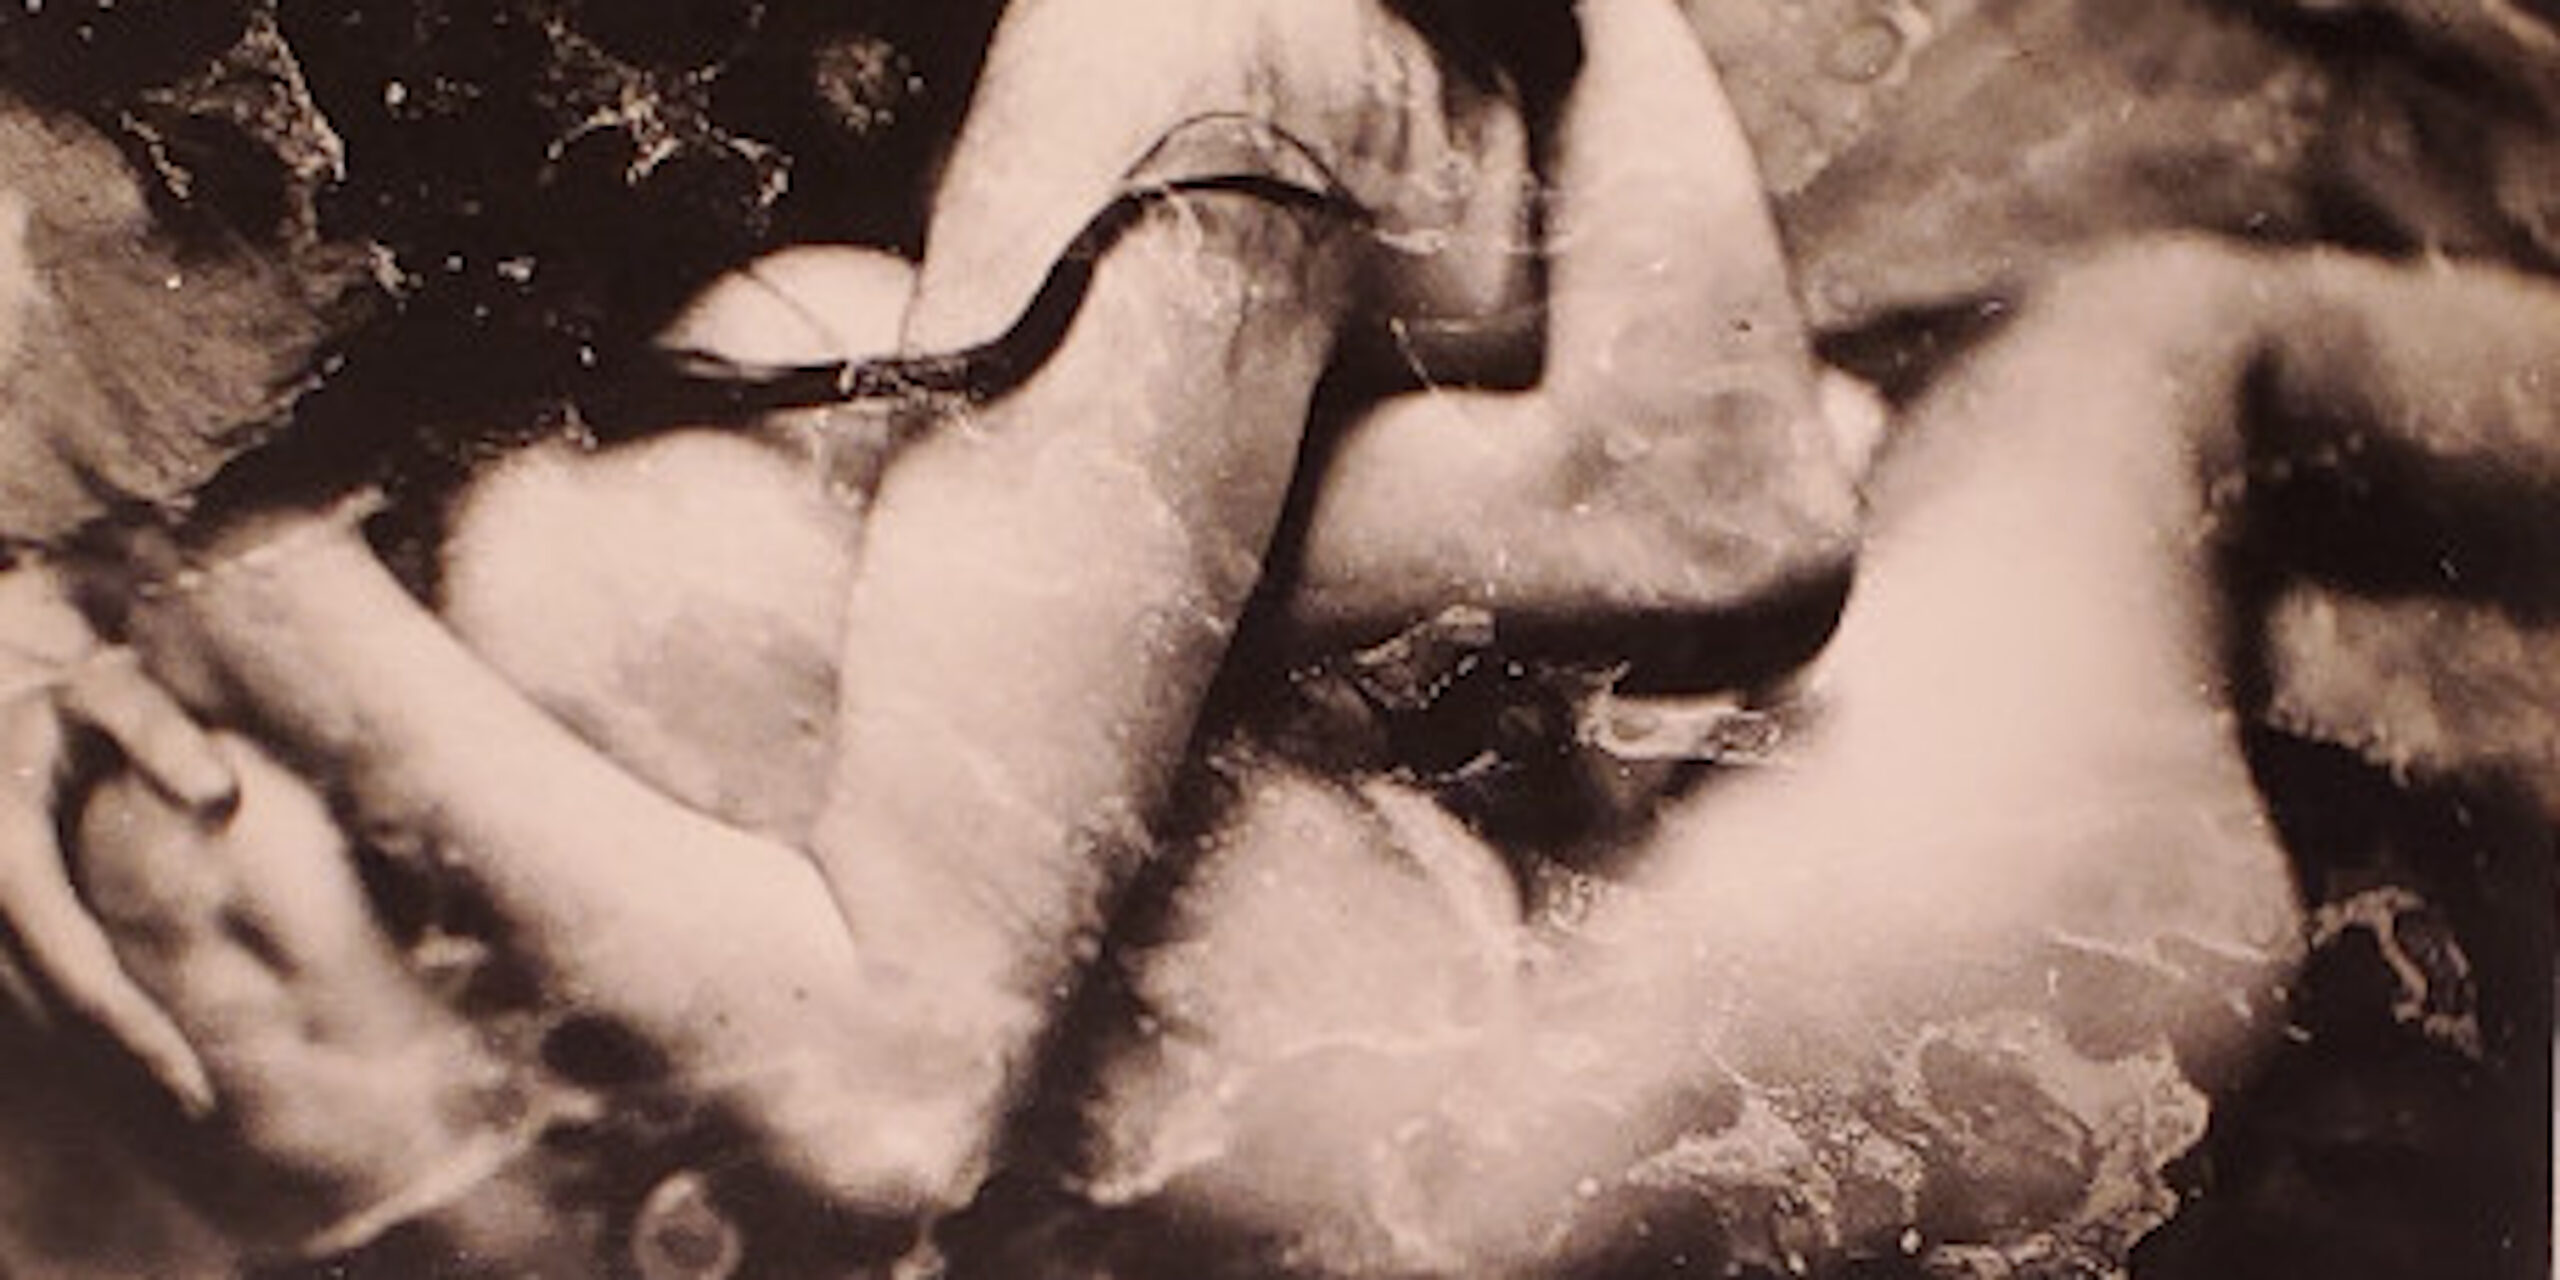 An image showing two nude figures embracing. Their faces are hidden, with the woman's hair covering the face of the other figure. The image has an overall marbled effect.